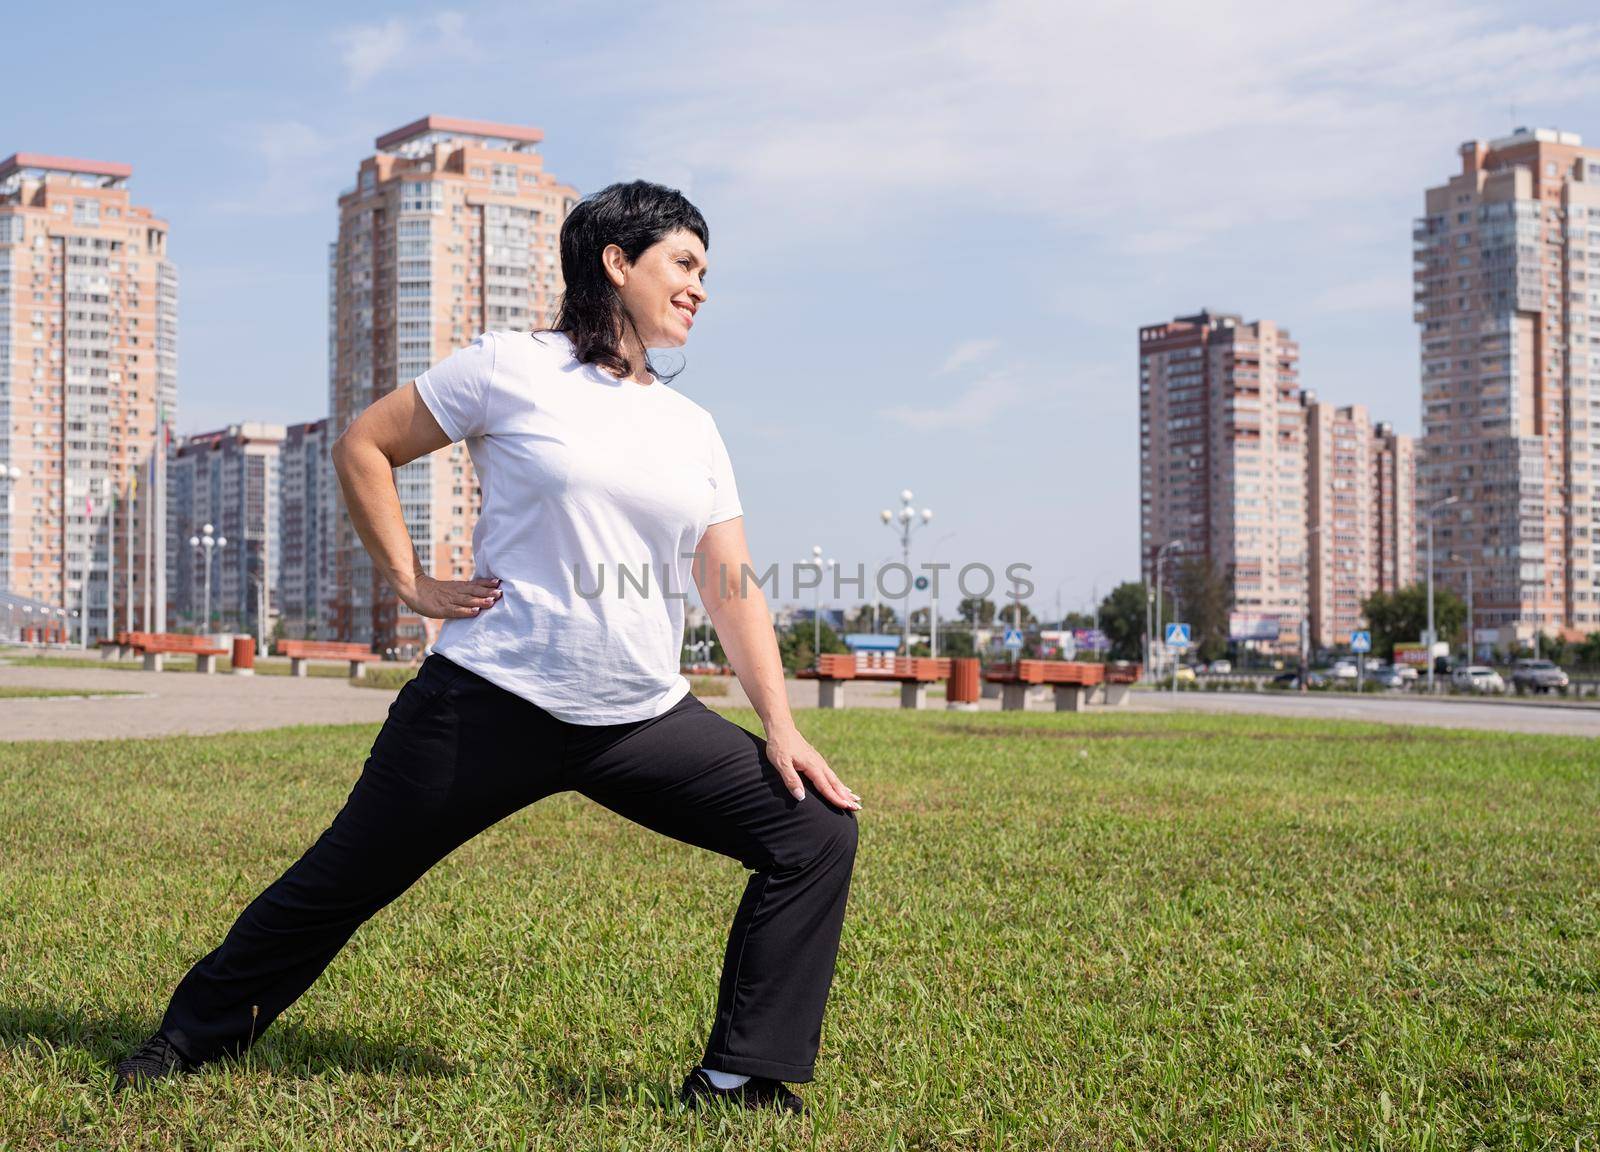 Sport and fitness. Senior sport. Active seniors. Smiling senior woman warming up stretching outdoors in the park